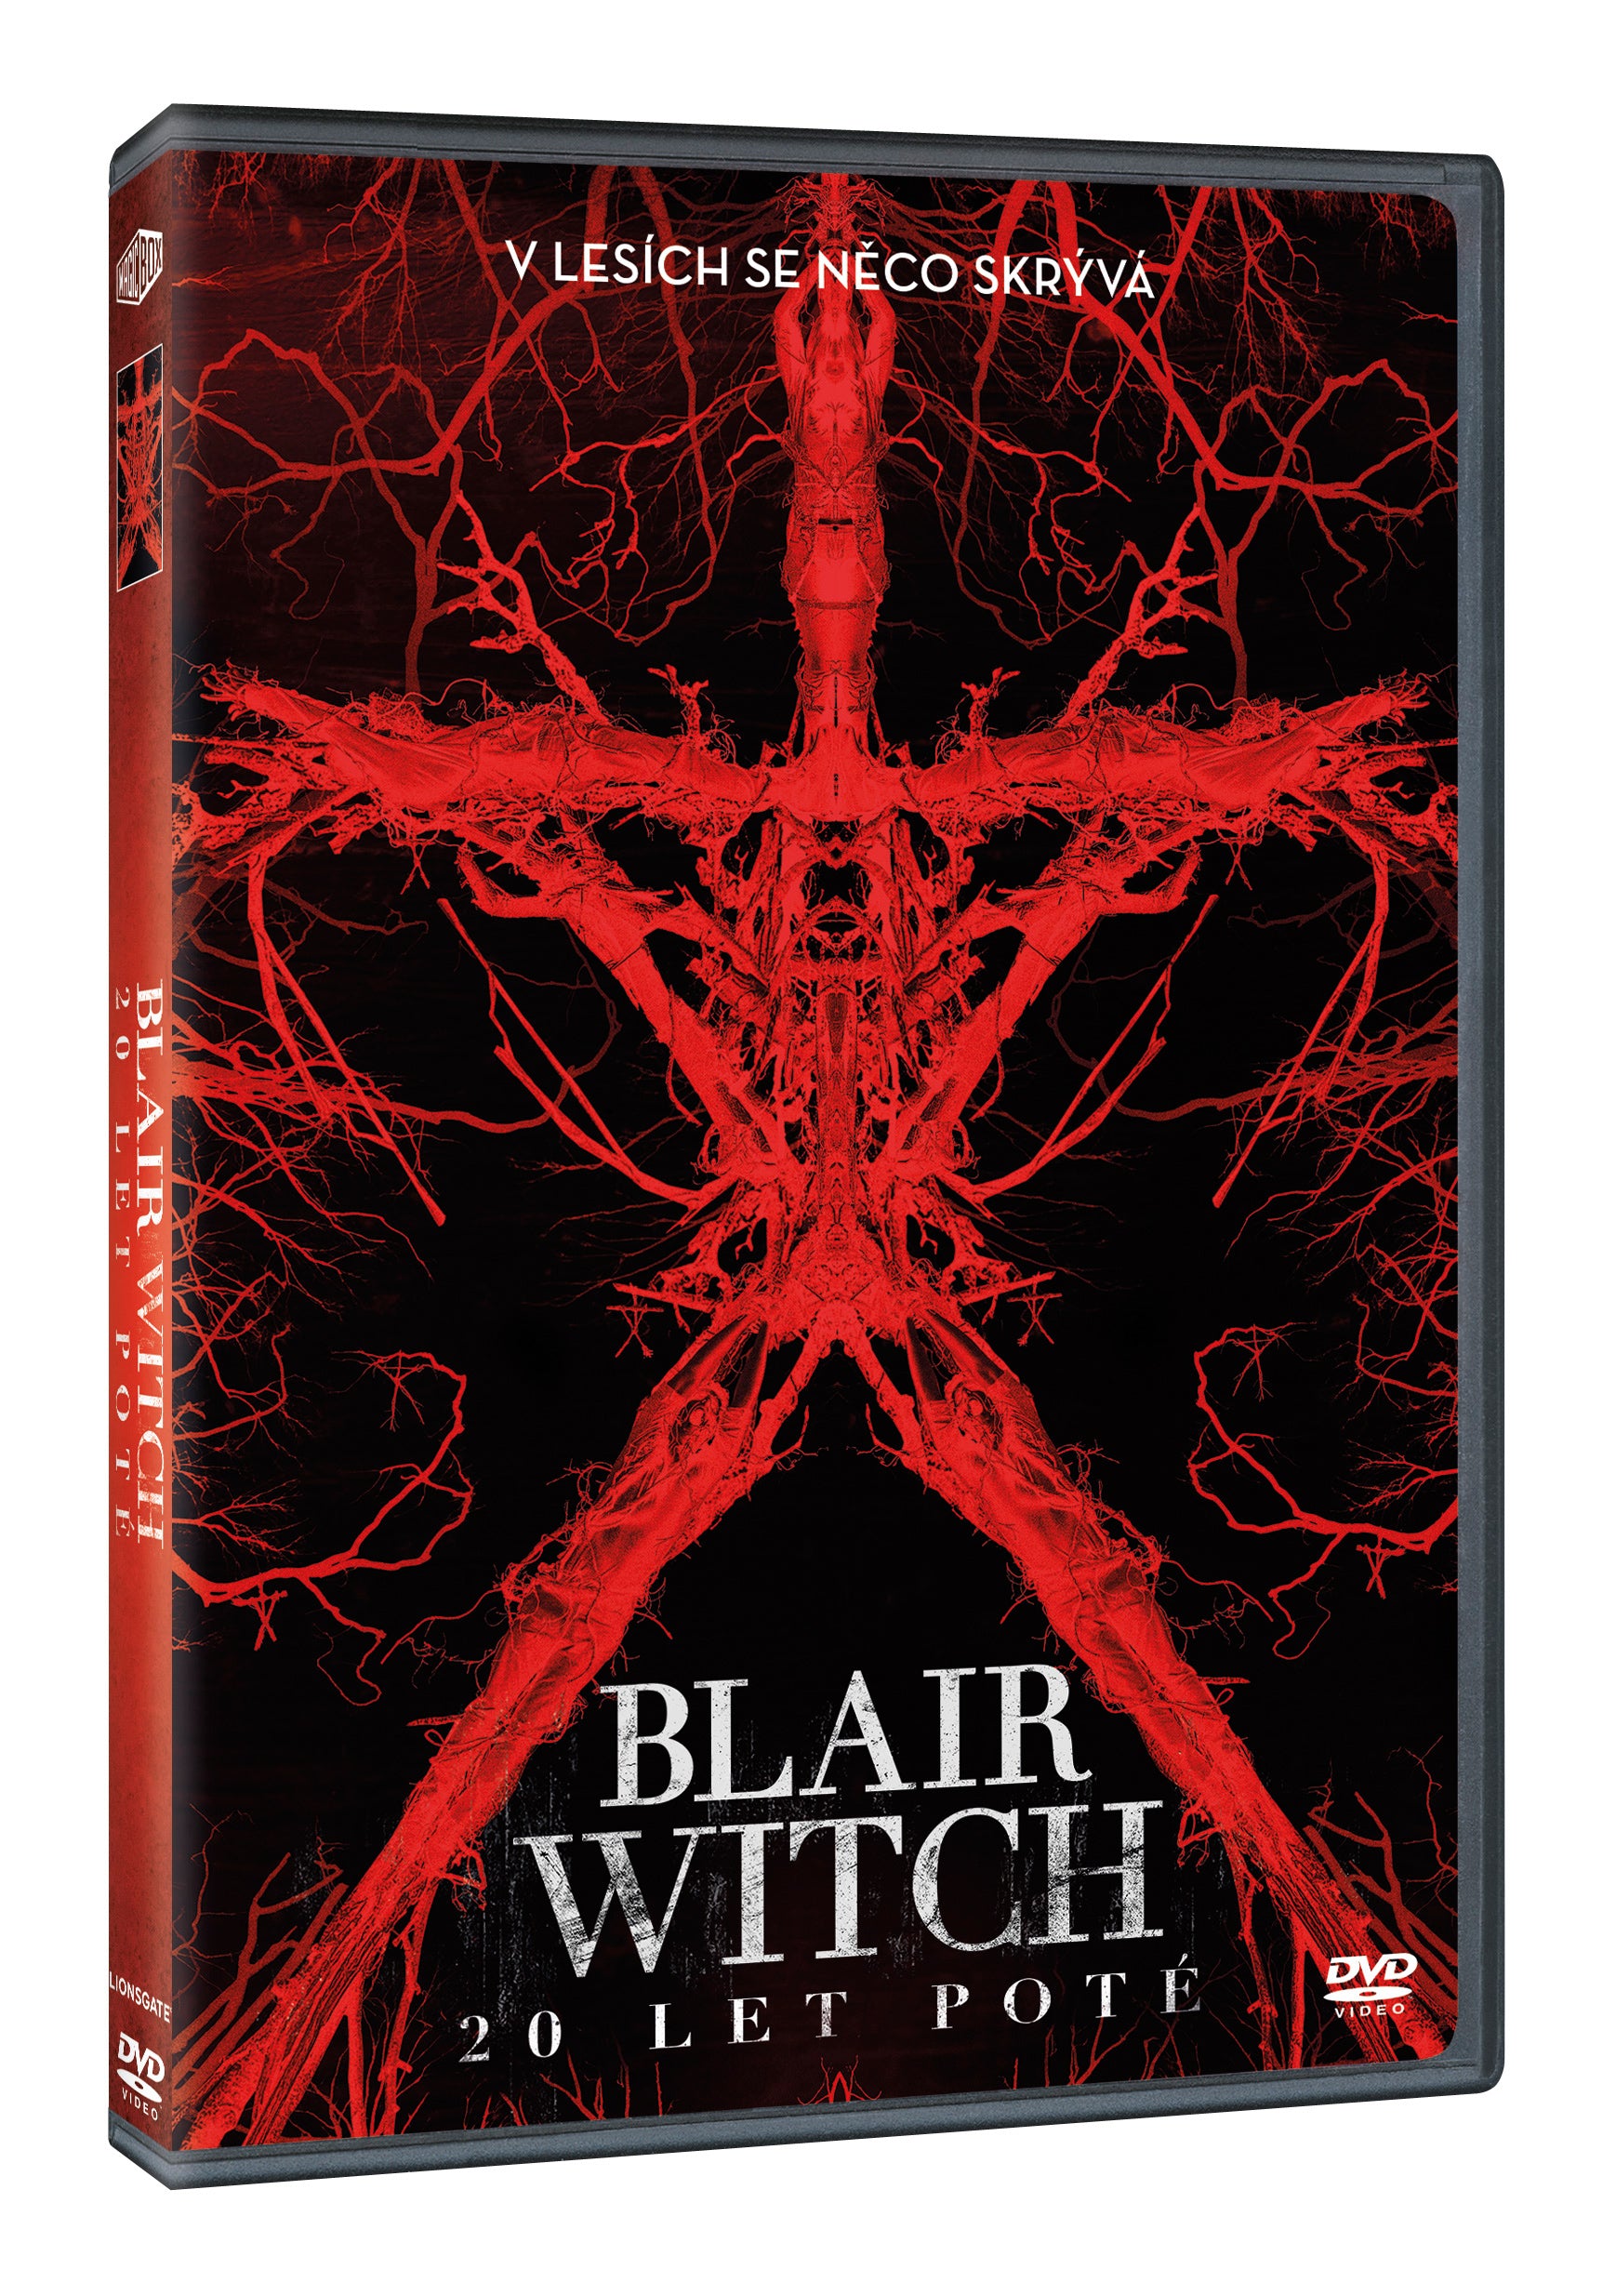 Blair Witch: 20 let pote DVD / Blair Witch